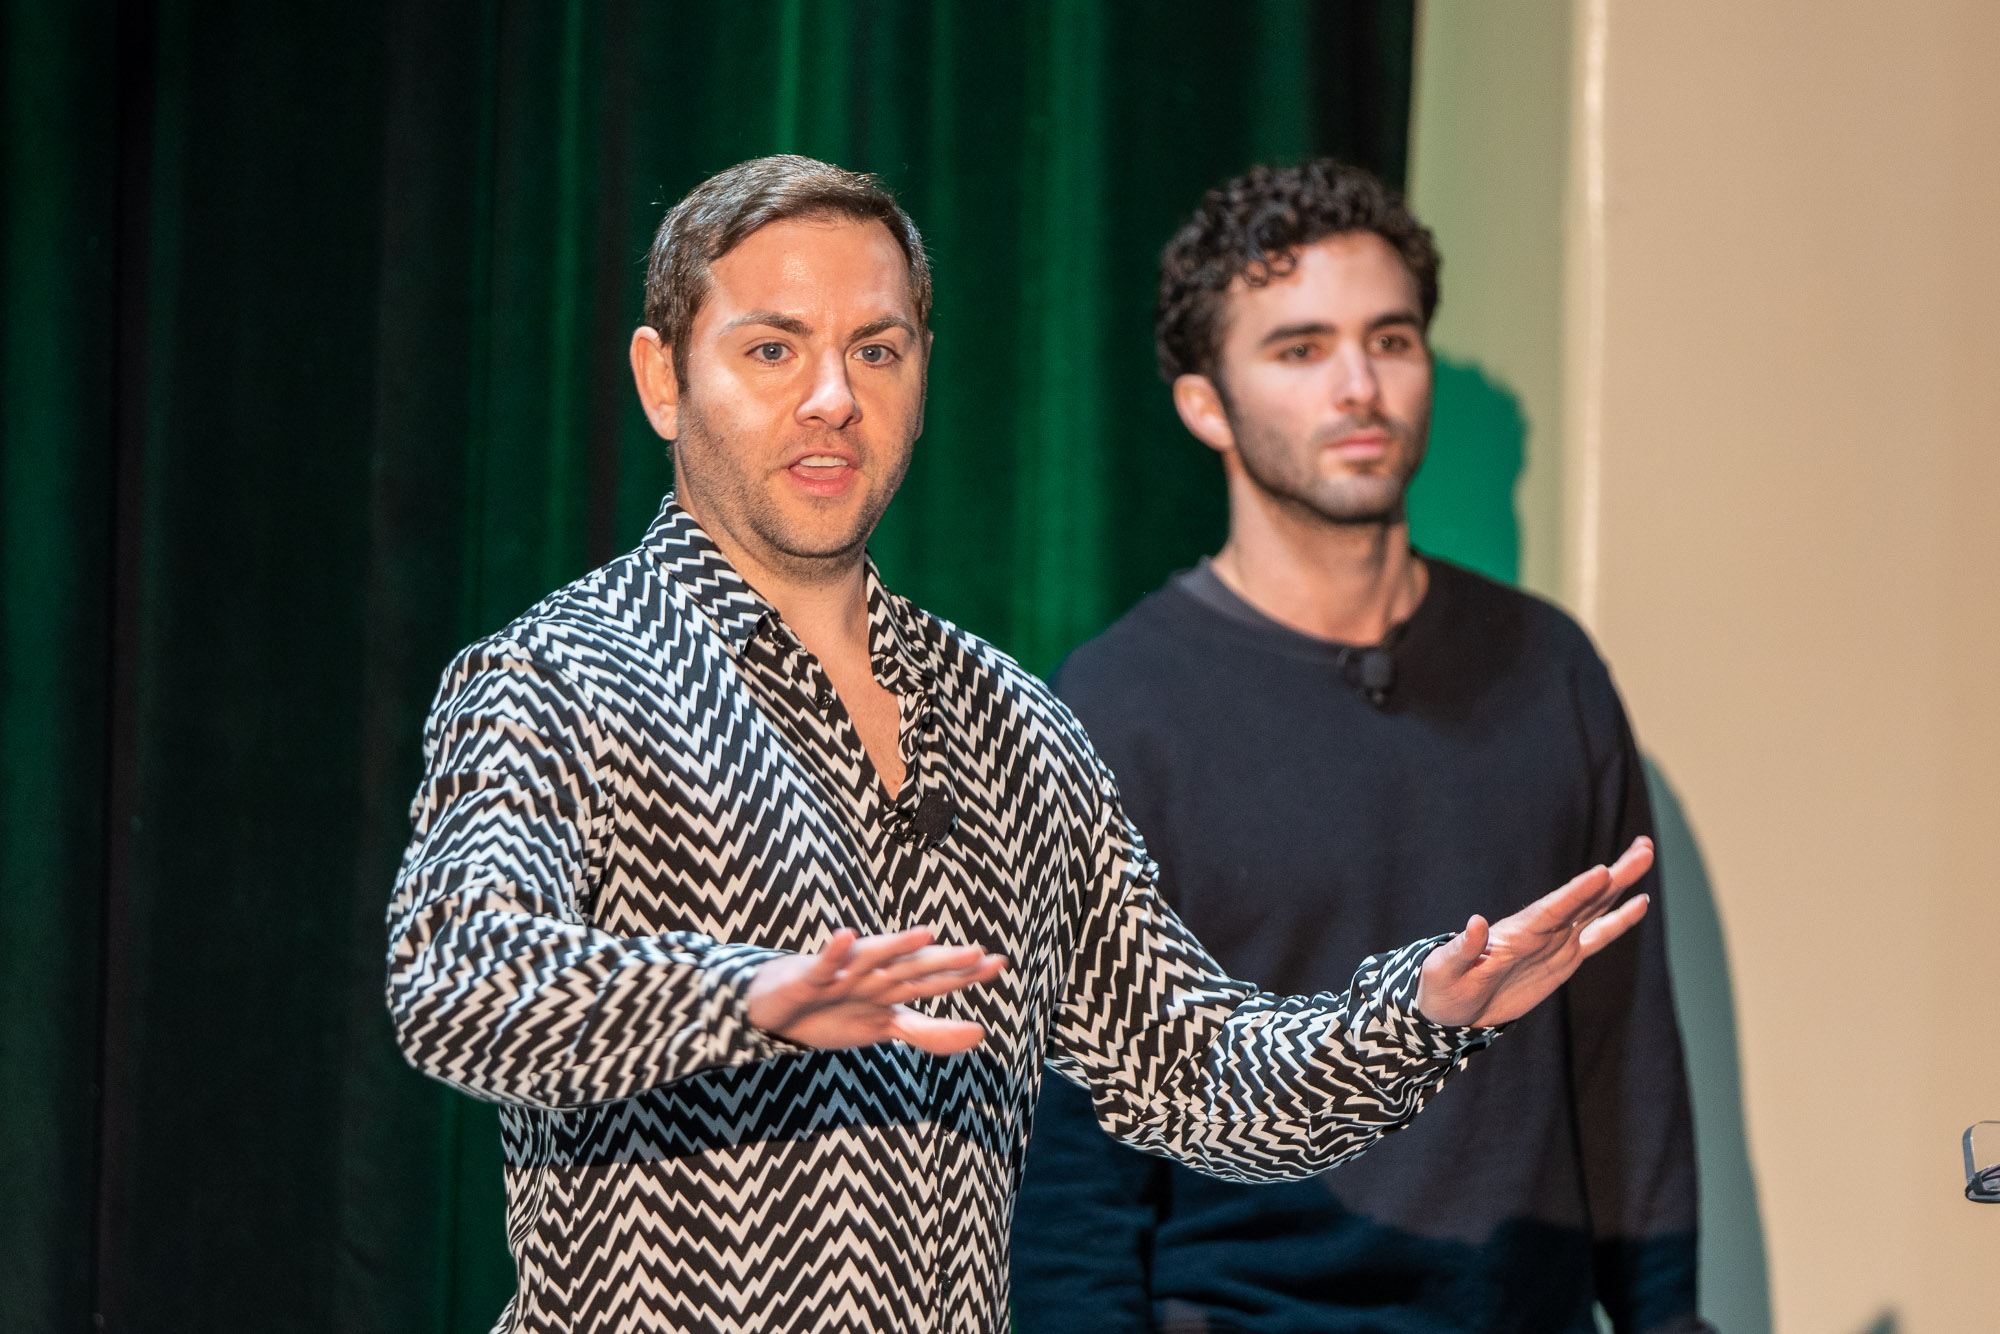 Josh Machiz, Partner at Redpoint, and Rashad Asir, Head of Content at Redpoint, about "How to turn your startup into a social star" at TechCrunch Early Stage in Boston on April 20, 2023.  Image credits: HJ Jan Kamps / TechCrunch